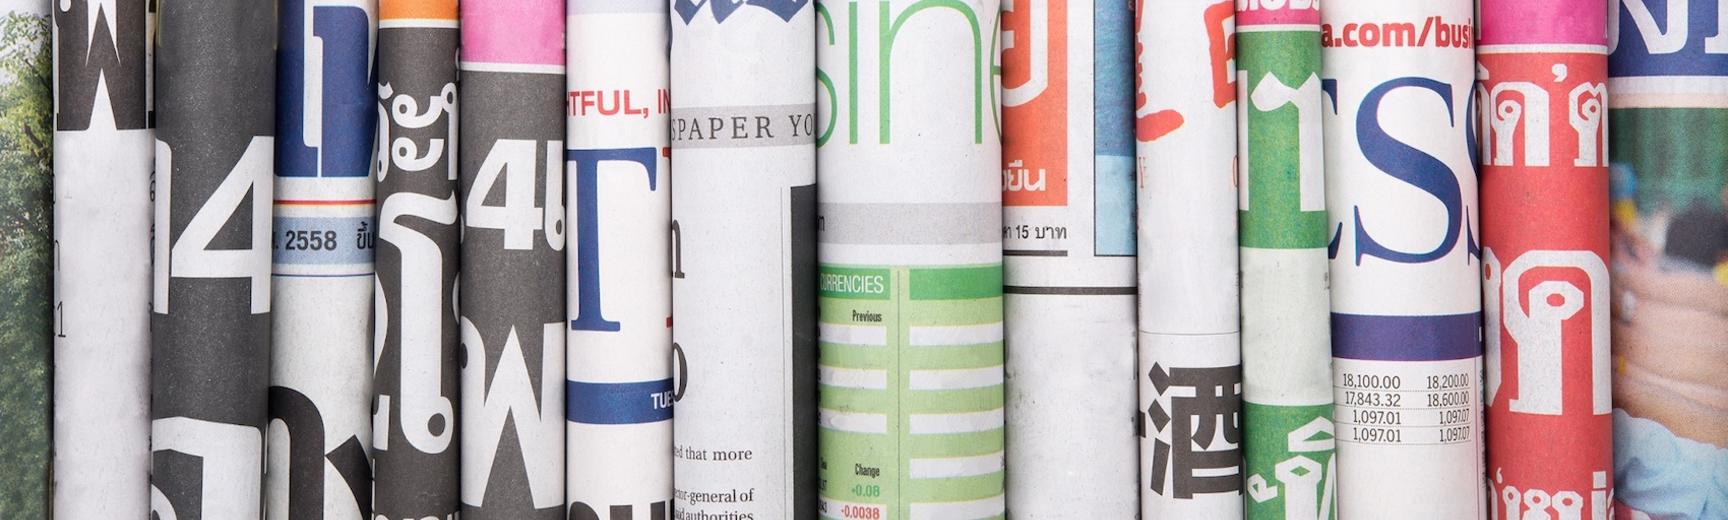 Newspaper article stack